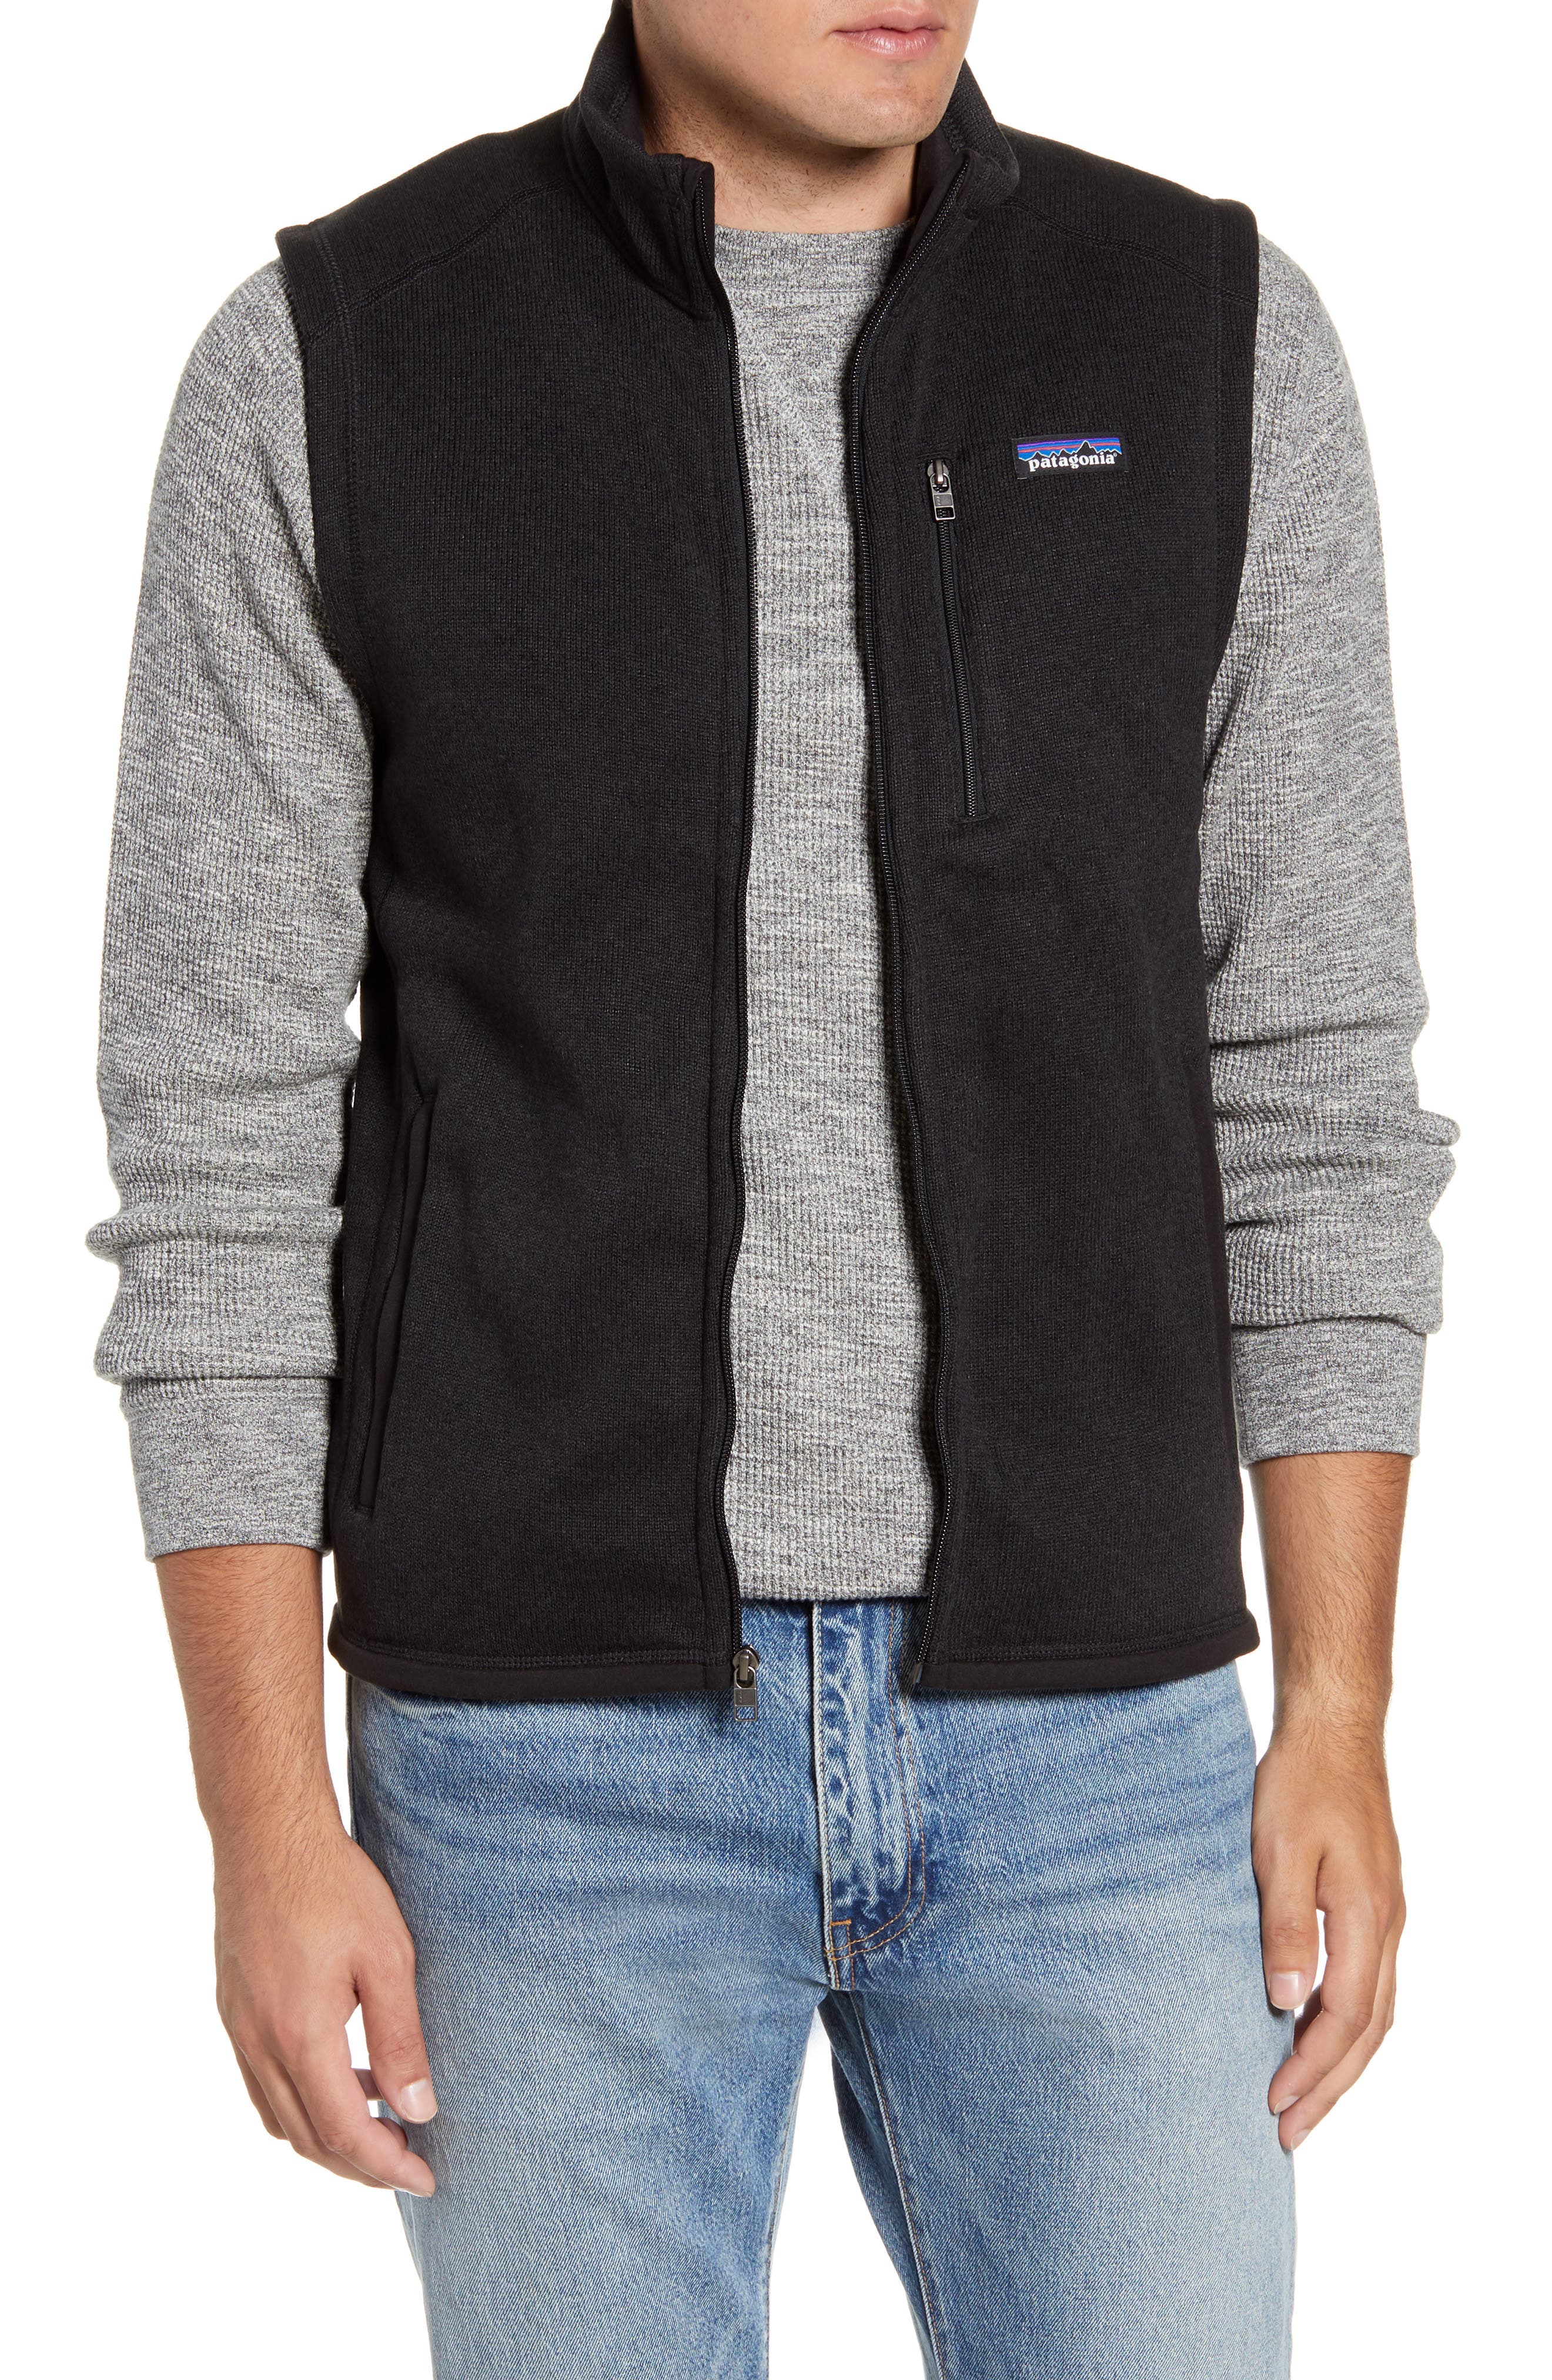 patagonia better sweater vest sale